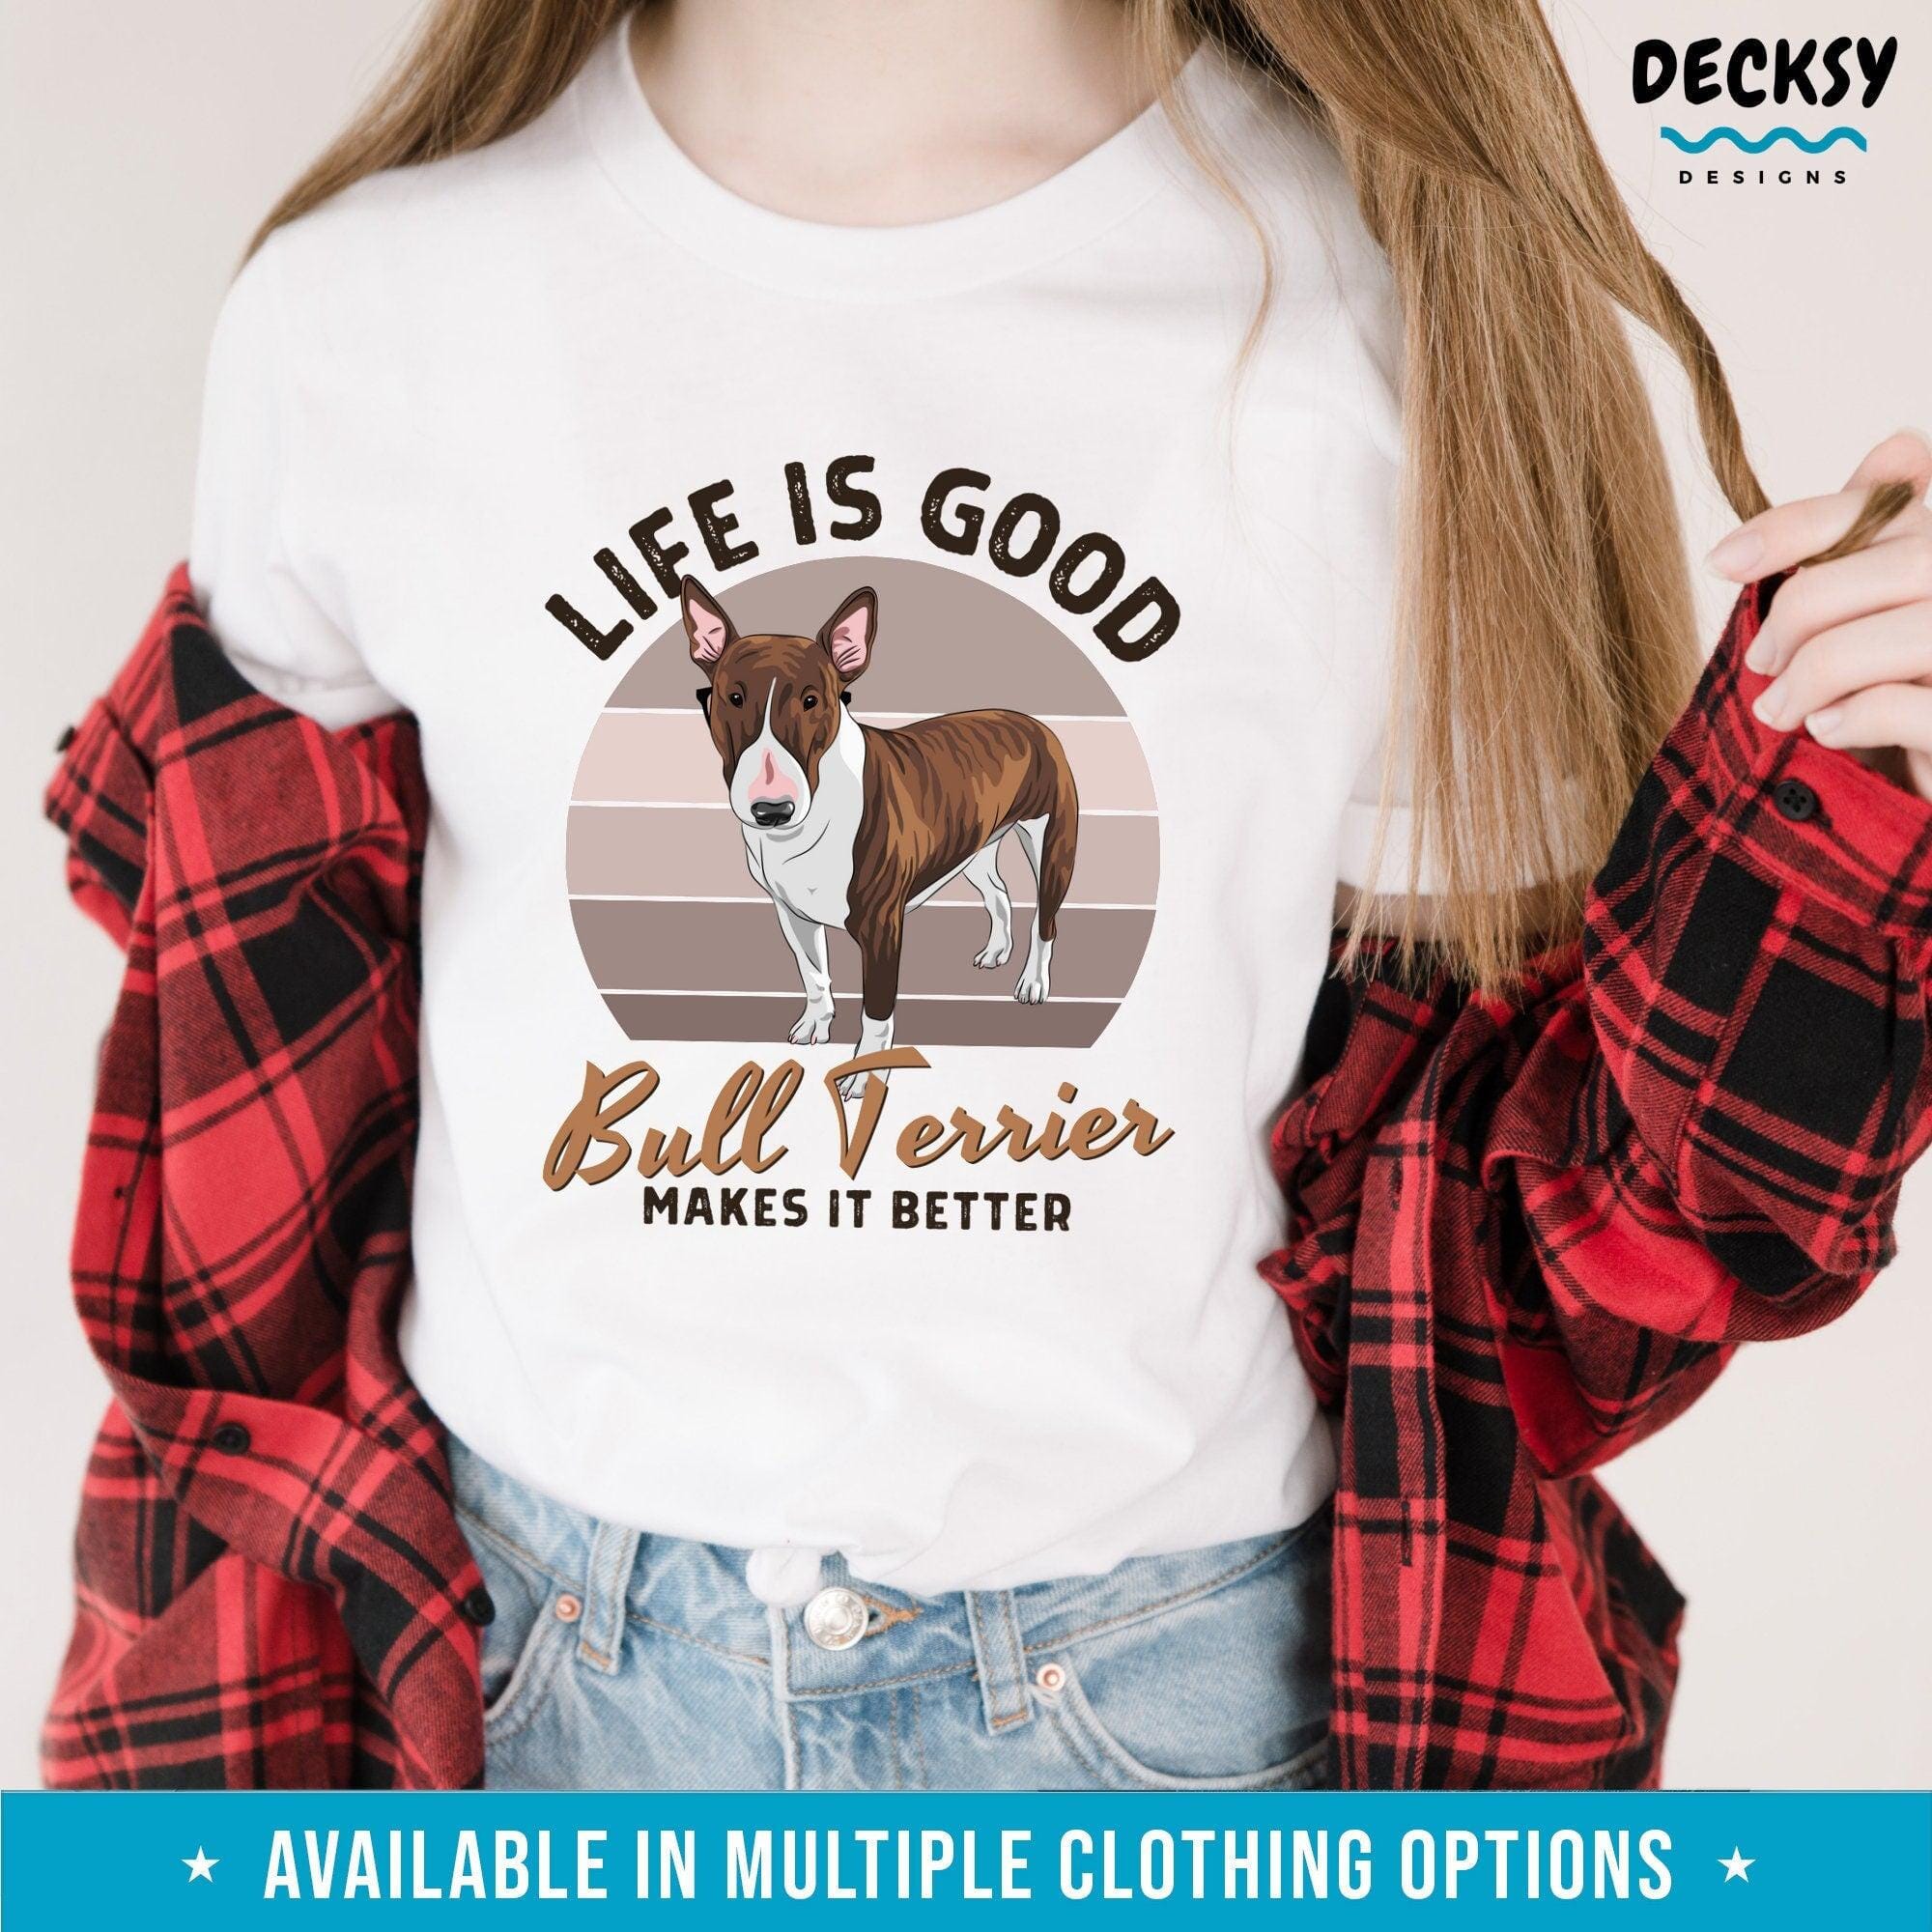 Bull Terrier Shirt, Dog Lover Gift-Clothing:Gender-Neutral Adult Clothing:Tops & Tees:T-shirts:Graphic Tees-DecksyDesigns